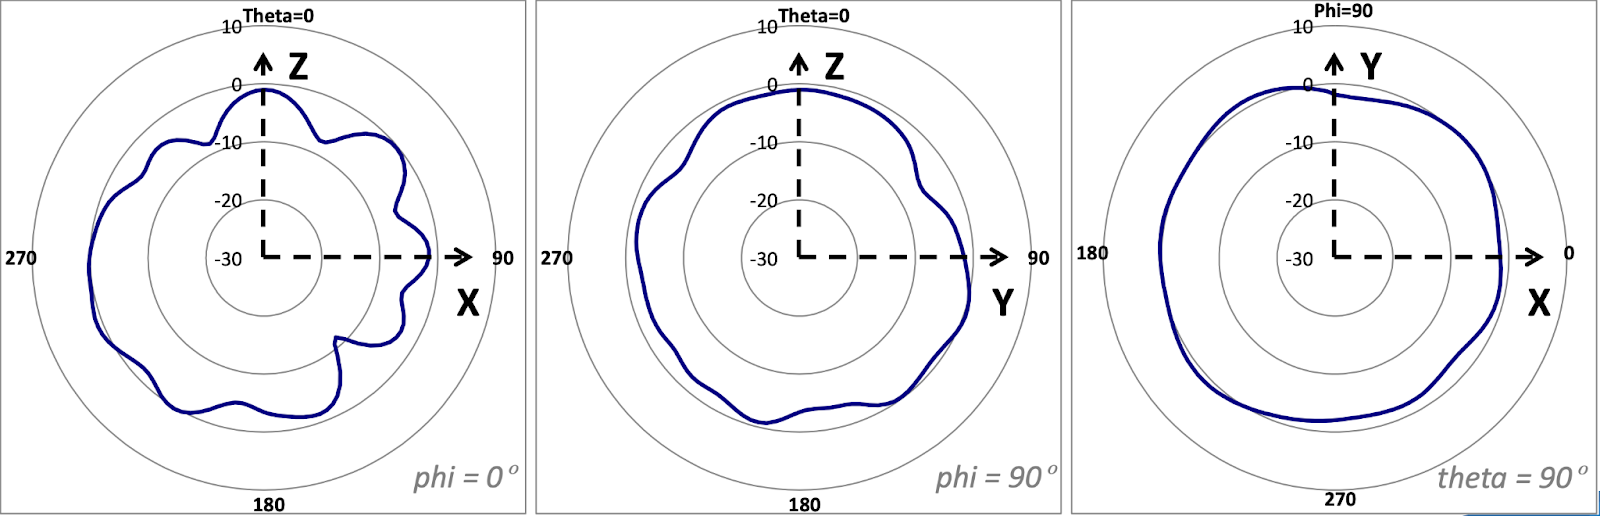 Signal coverage pattern for MR78 on BLE (with Phi and Theta values)